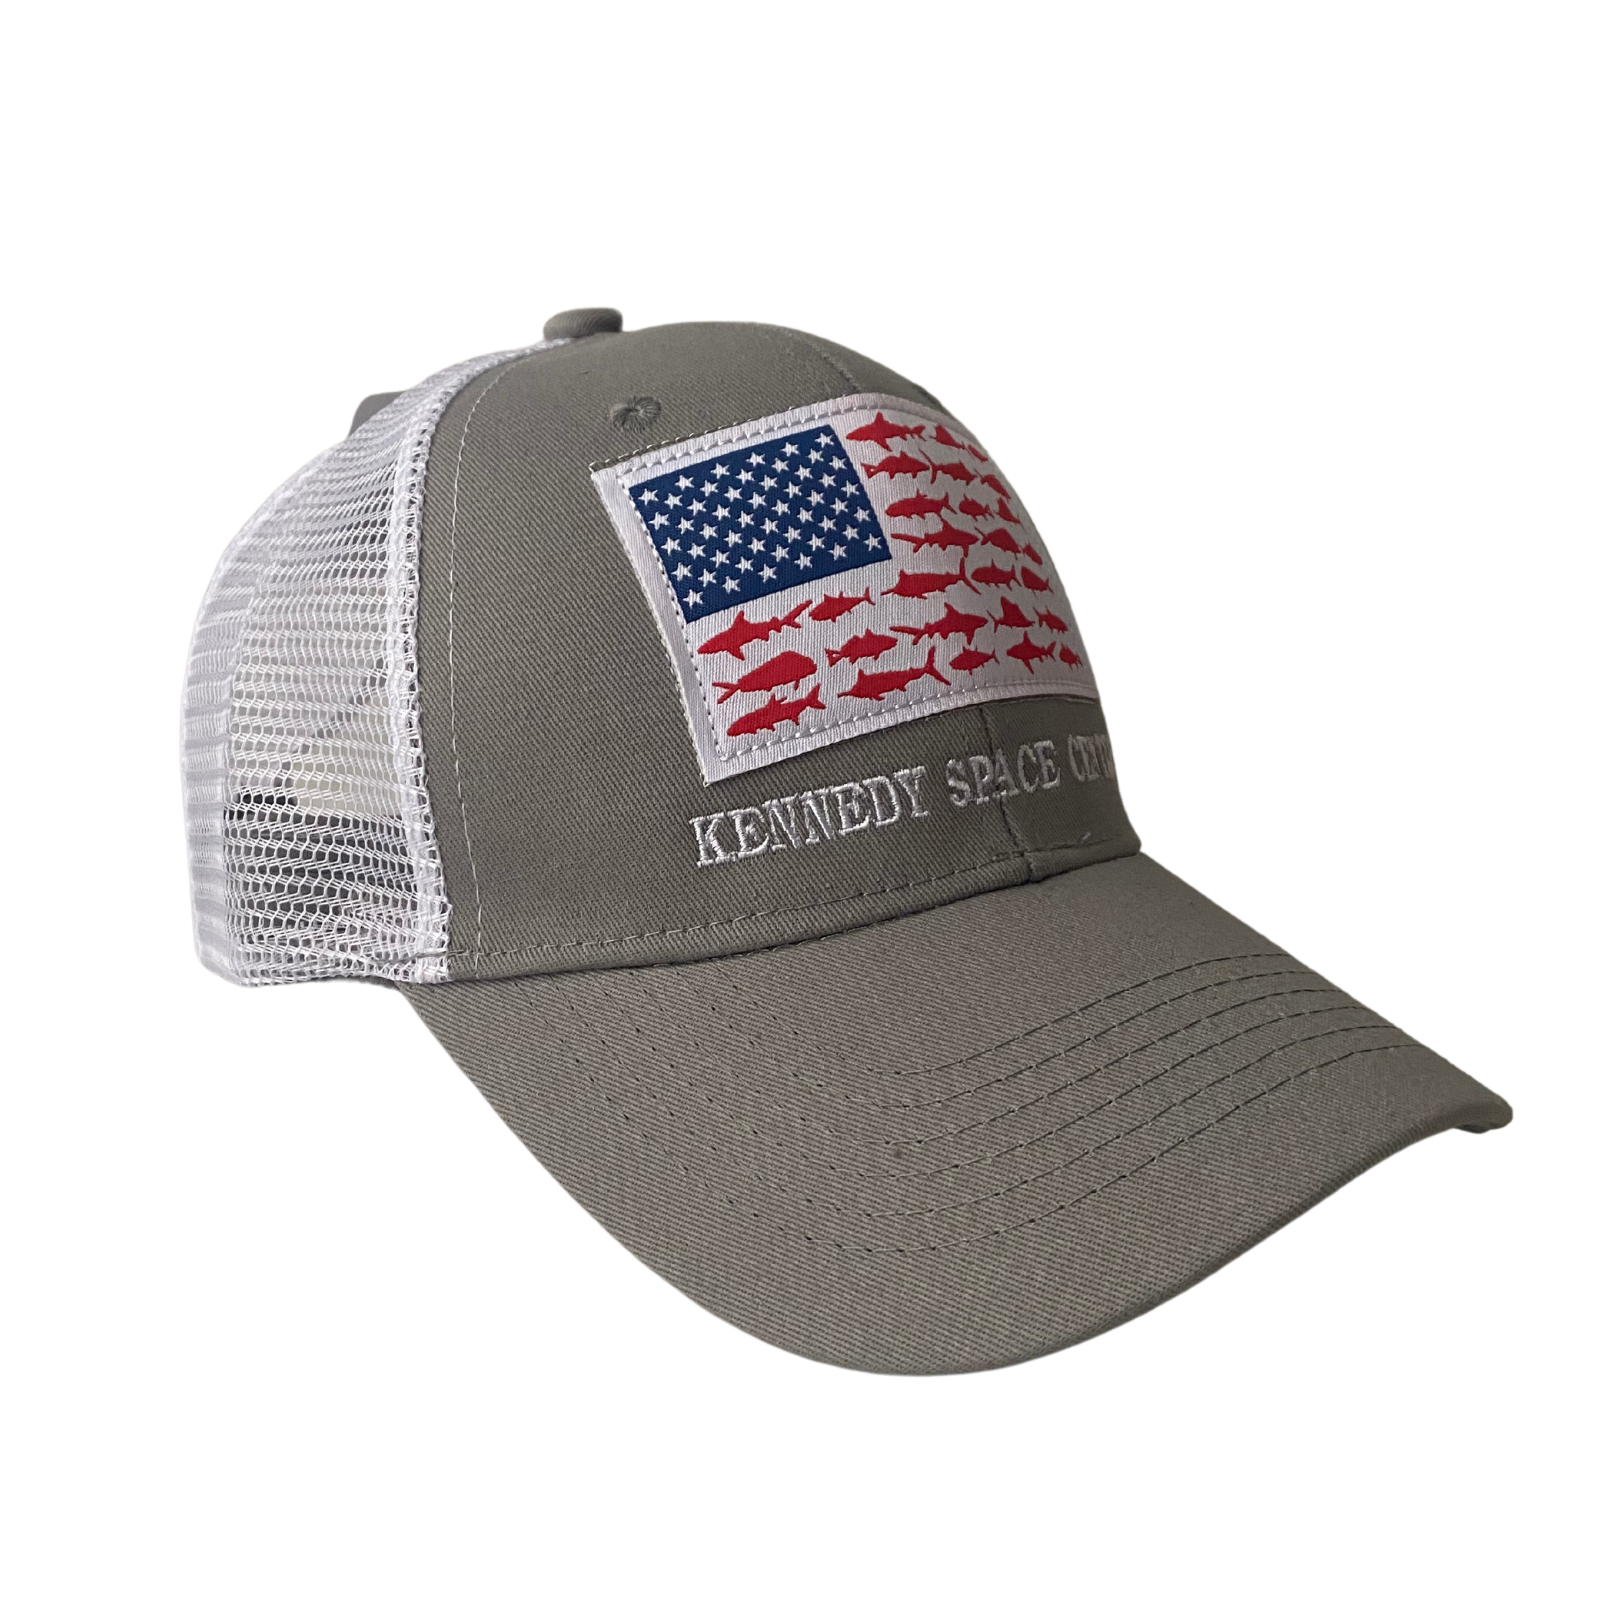 Kennedy Space Center Red Fish Flag Cap